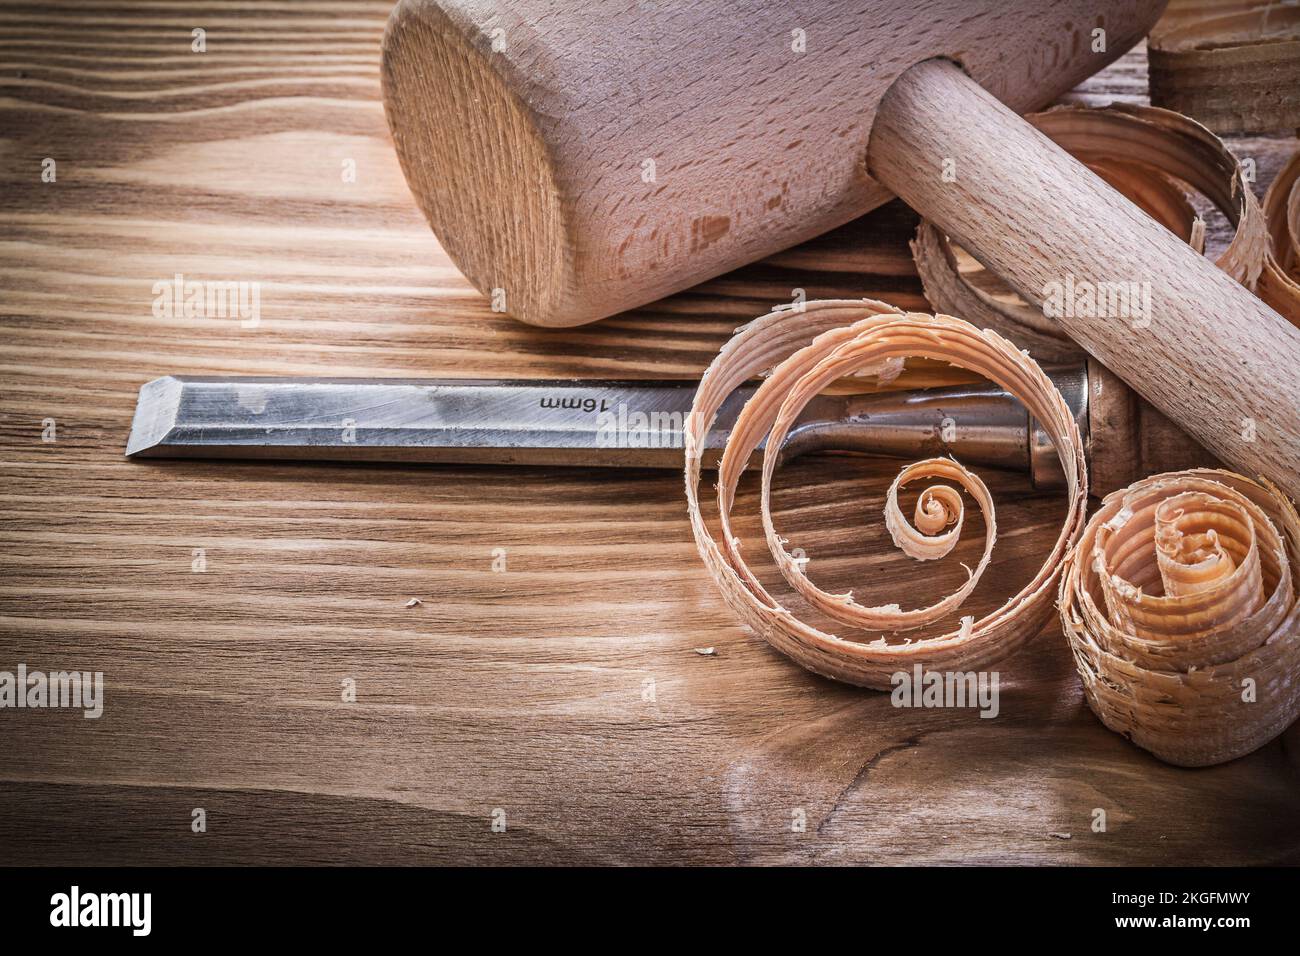 Wooden mallet firmer chisels curled shavings on vintage wood board construction concept. Stock Photo